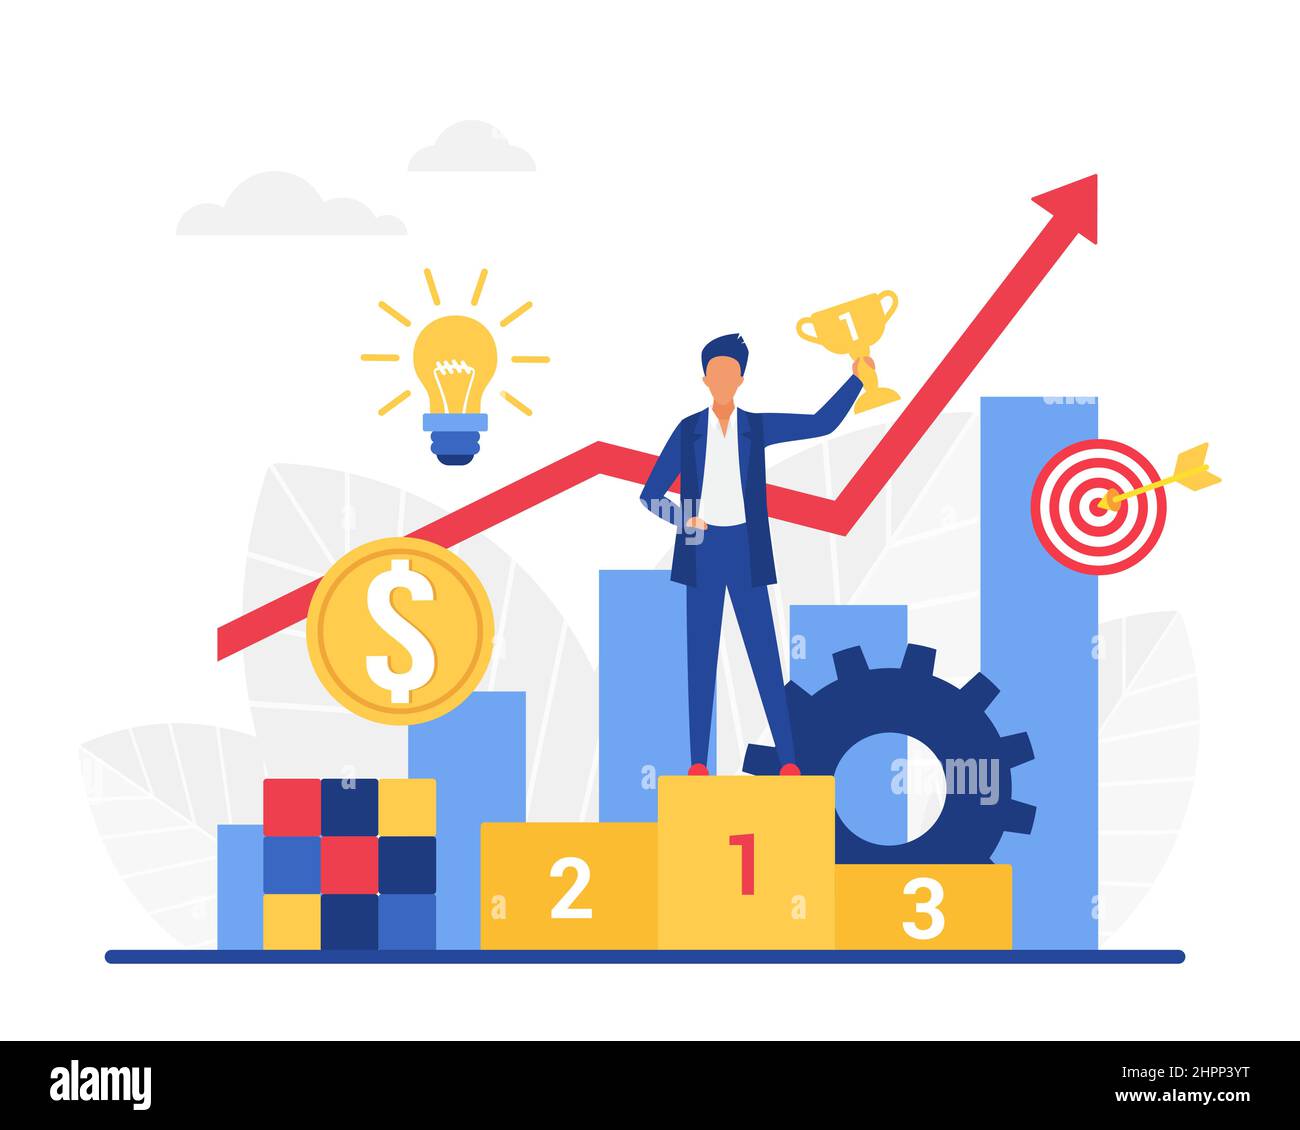 Personal success rewarding and winner achievements. Goals accomplished champion strategy growth Stock Vector